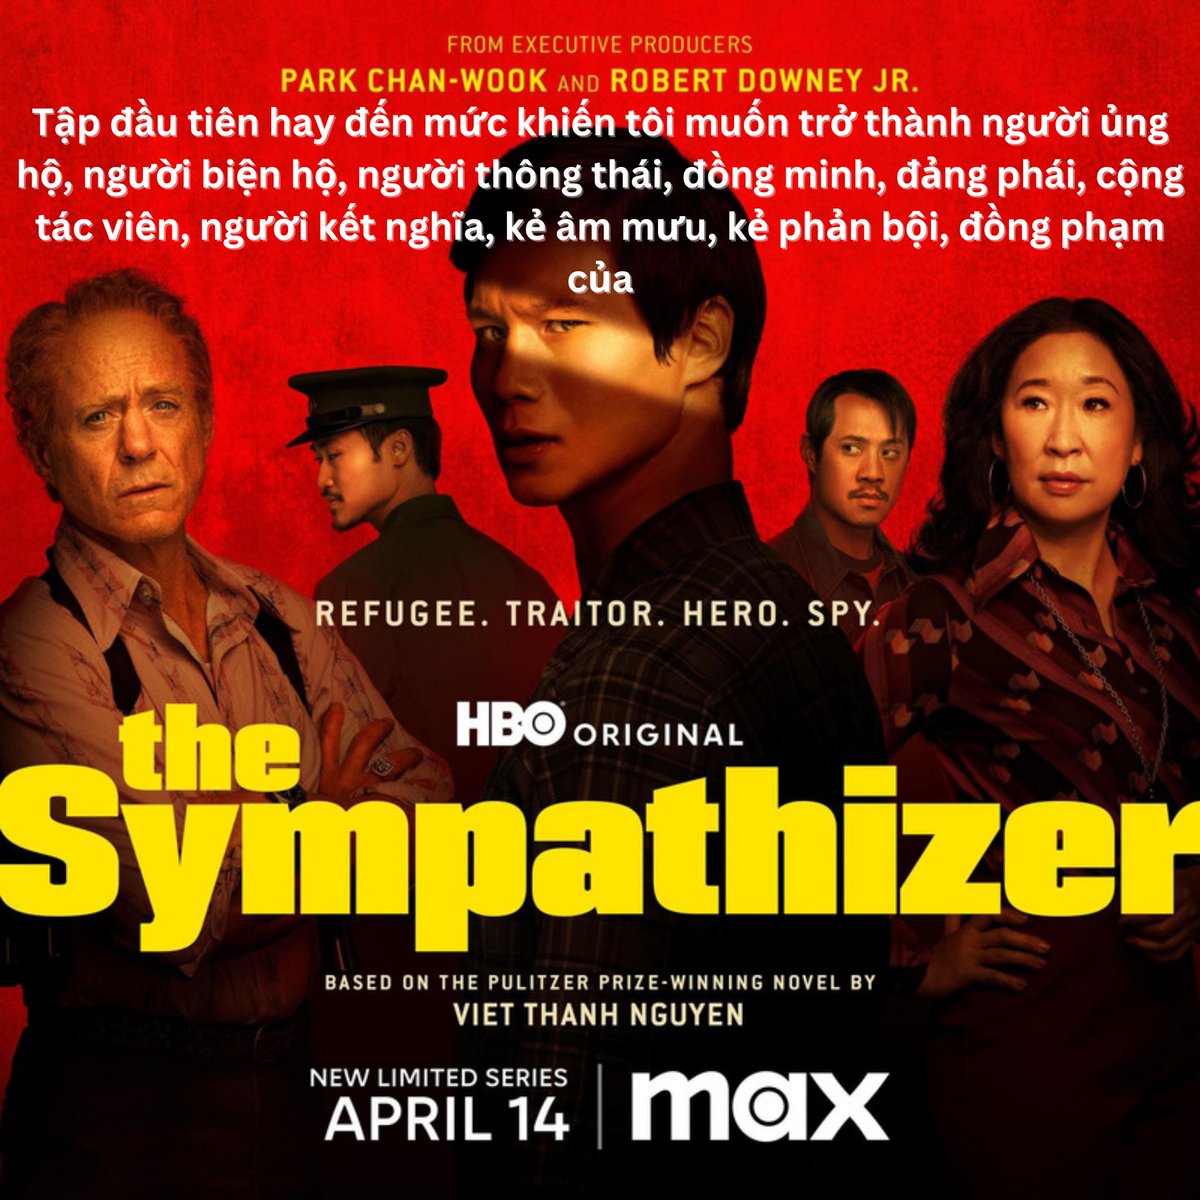 HBO and Gold House Present: The Sympathizer, An Exclusive Screening and Conversation

@hbo
@streamonmax @sympathizerhbo @goldhouseco
#TheSympathizer

@а24
@capeusa
VIETNAMESE AMERICAN ROUNDTABLE
@varoundtable
DIASPORIC VIETNAMESE Artists NETWORK
@weare_dvan